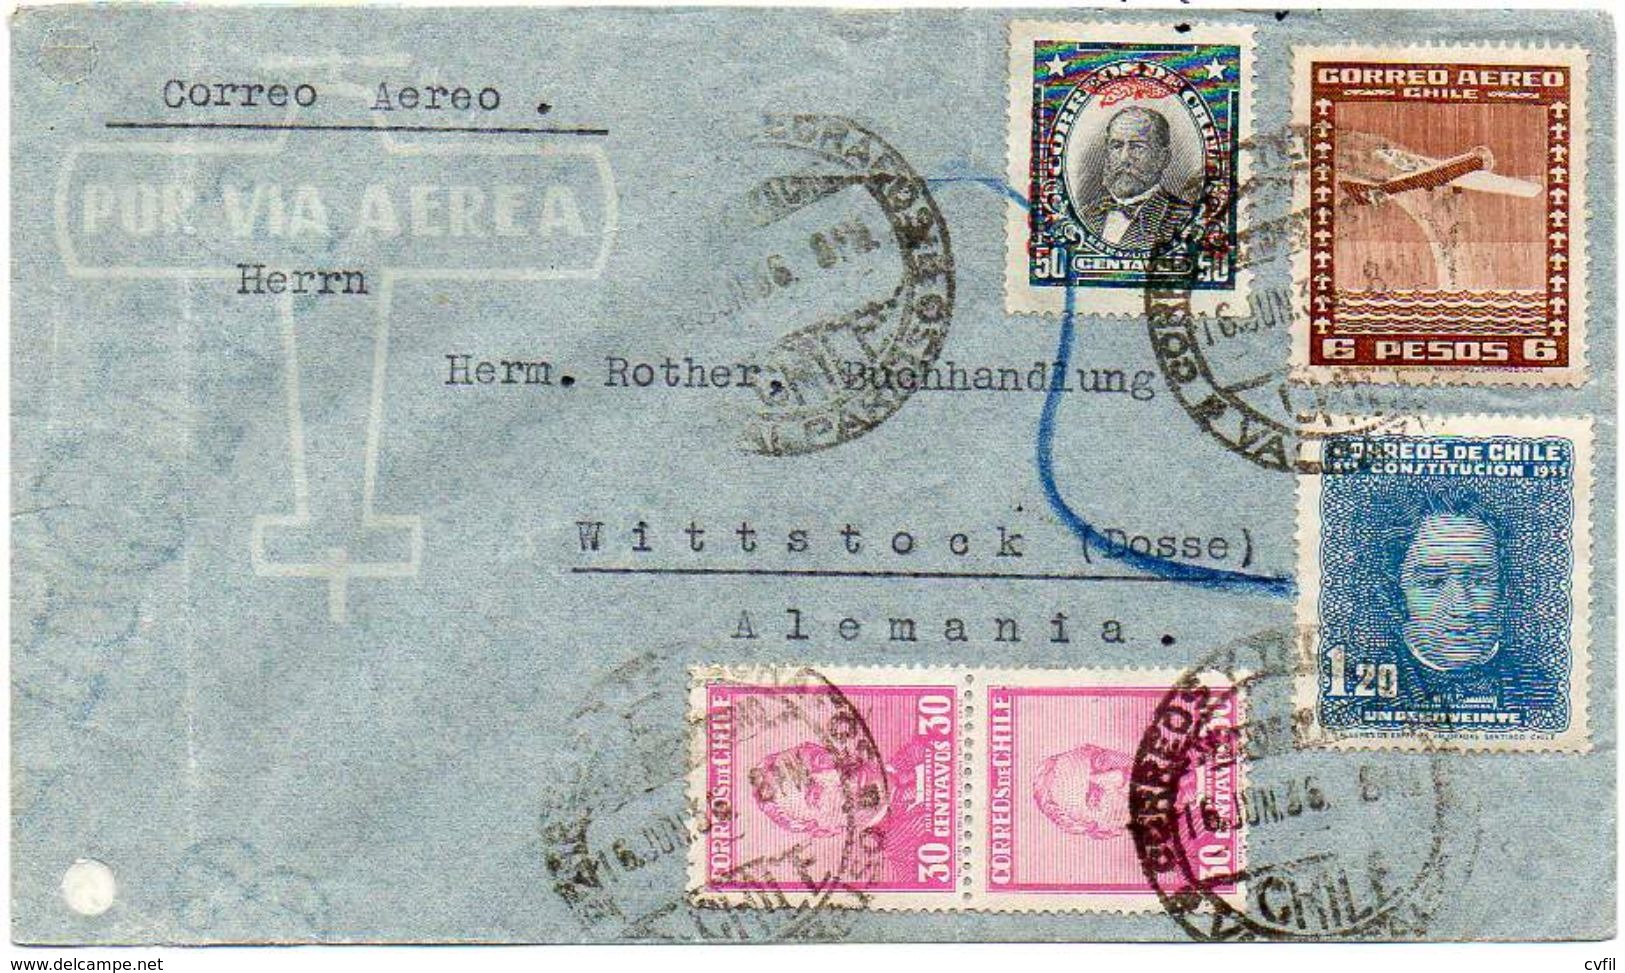 CHILE 1936 - Air Cover From Valparaiso To Wittstock, Dosse, Germany - Chile